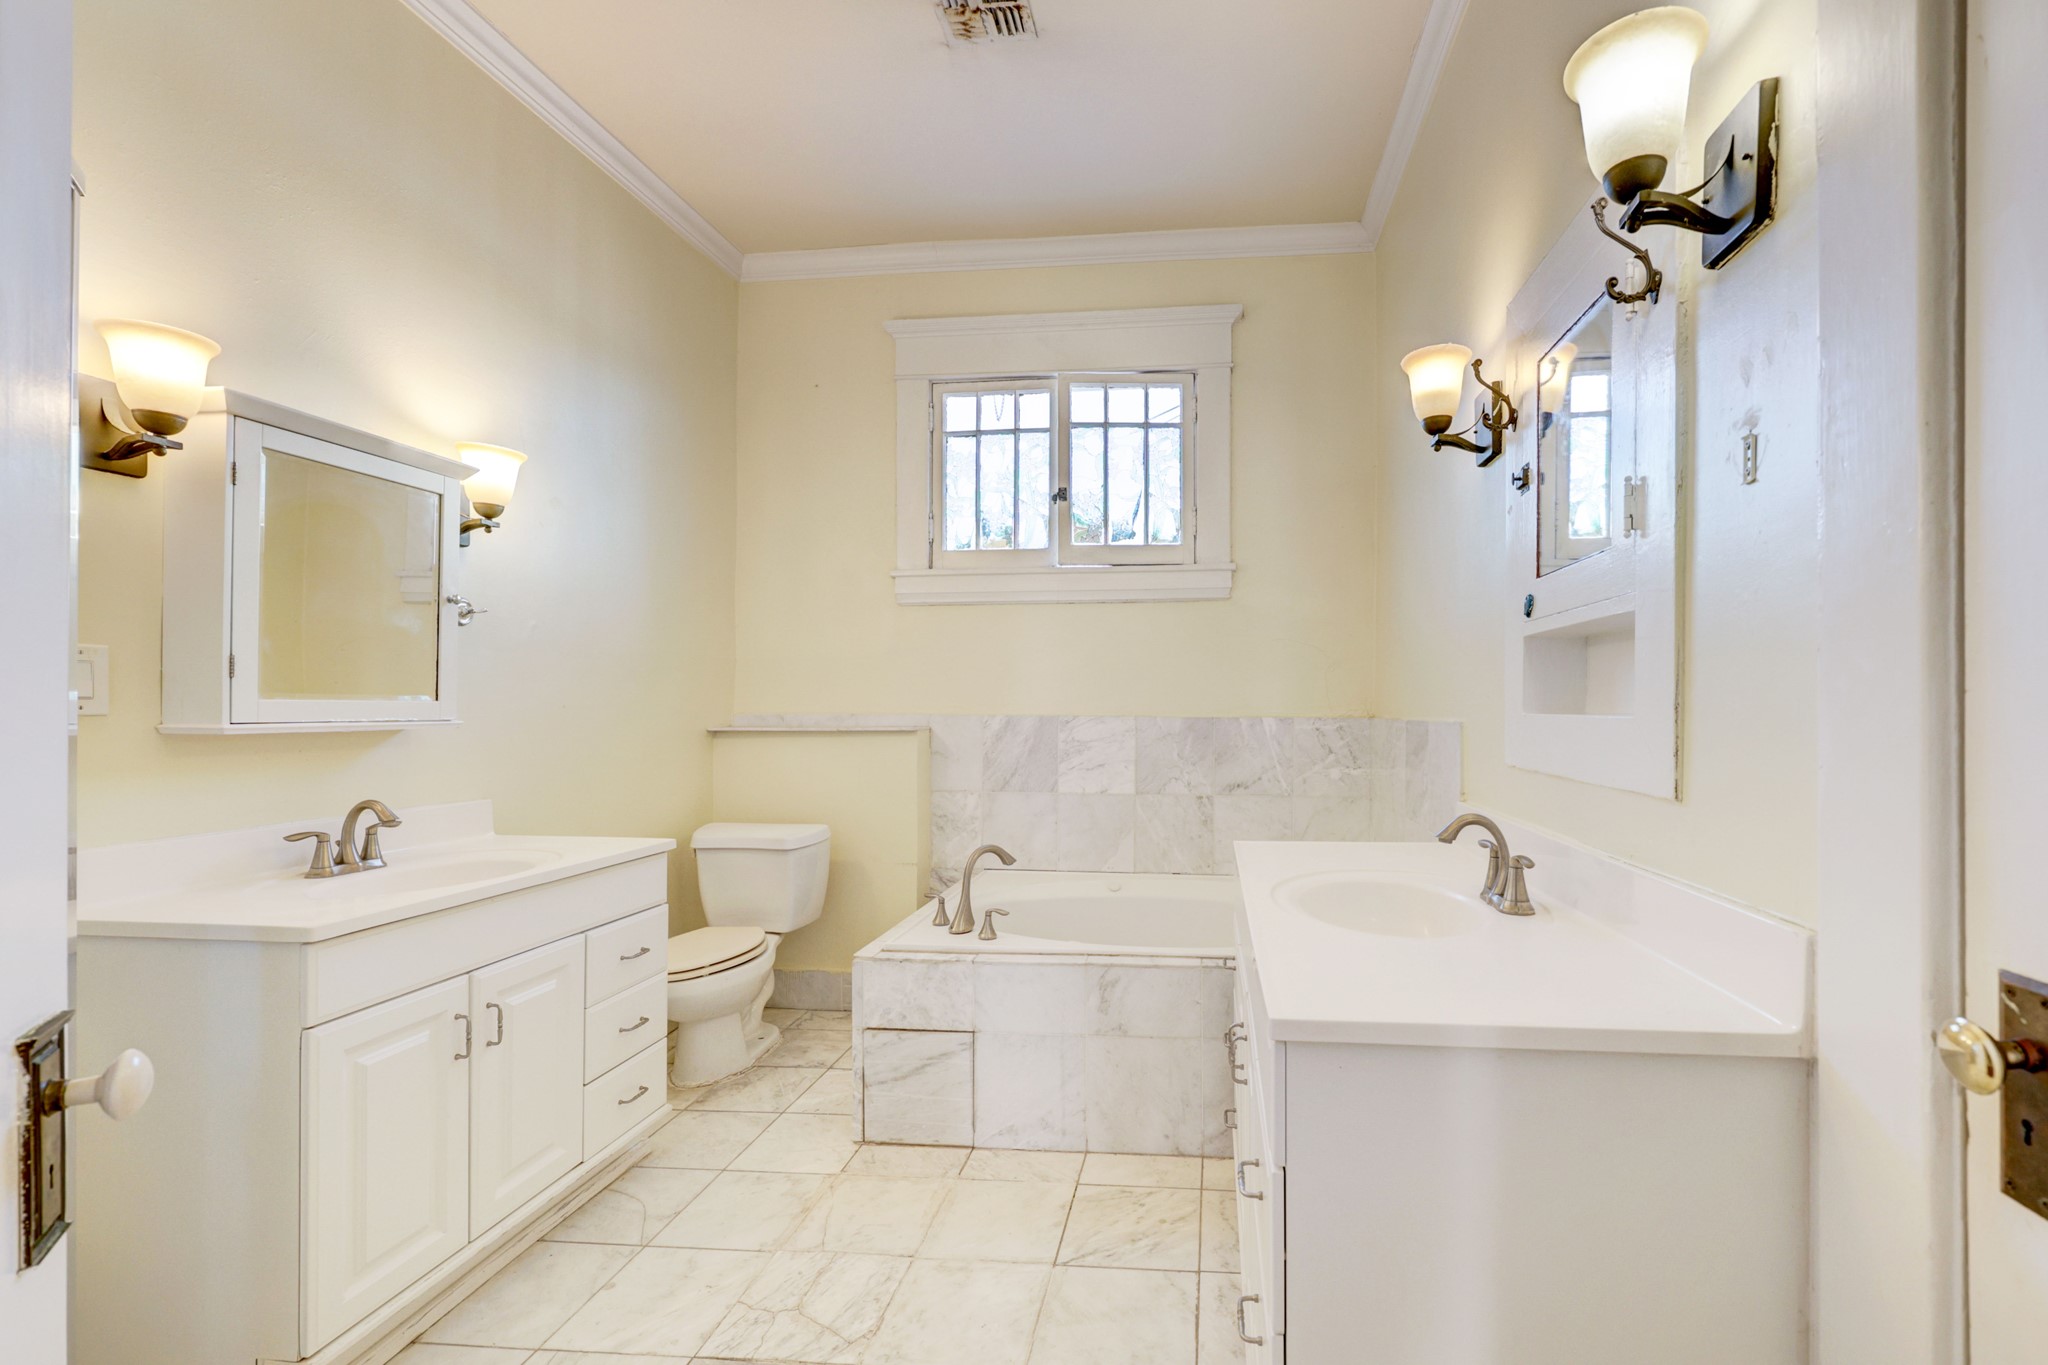 Second level bathroom with dual vanities, soaking tub and separate shower.